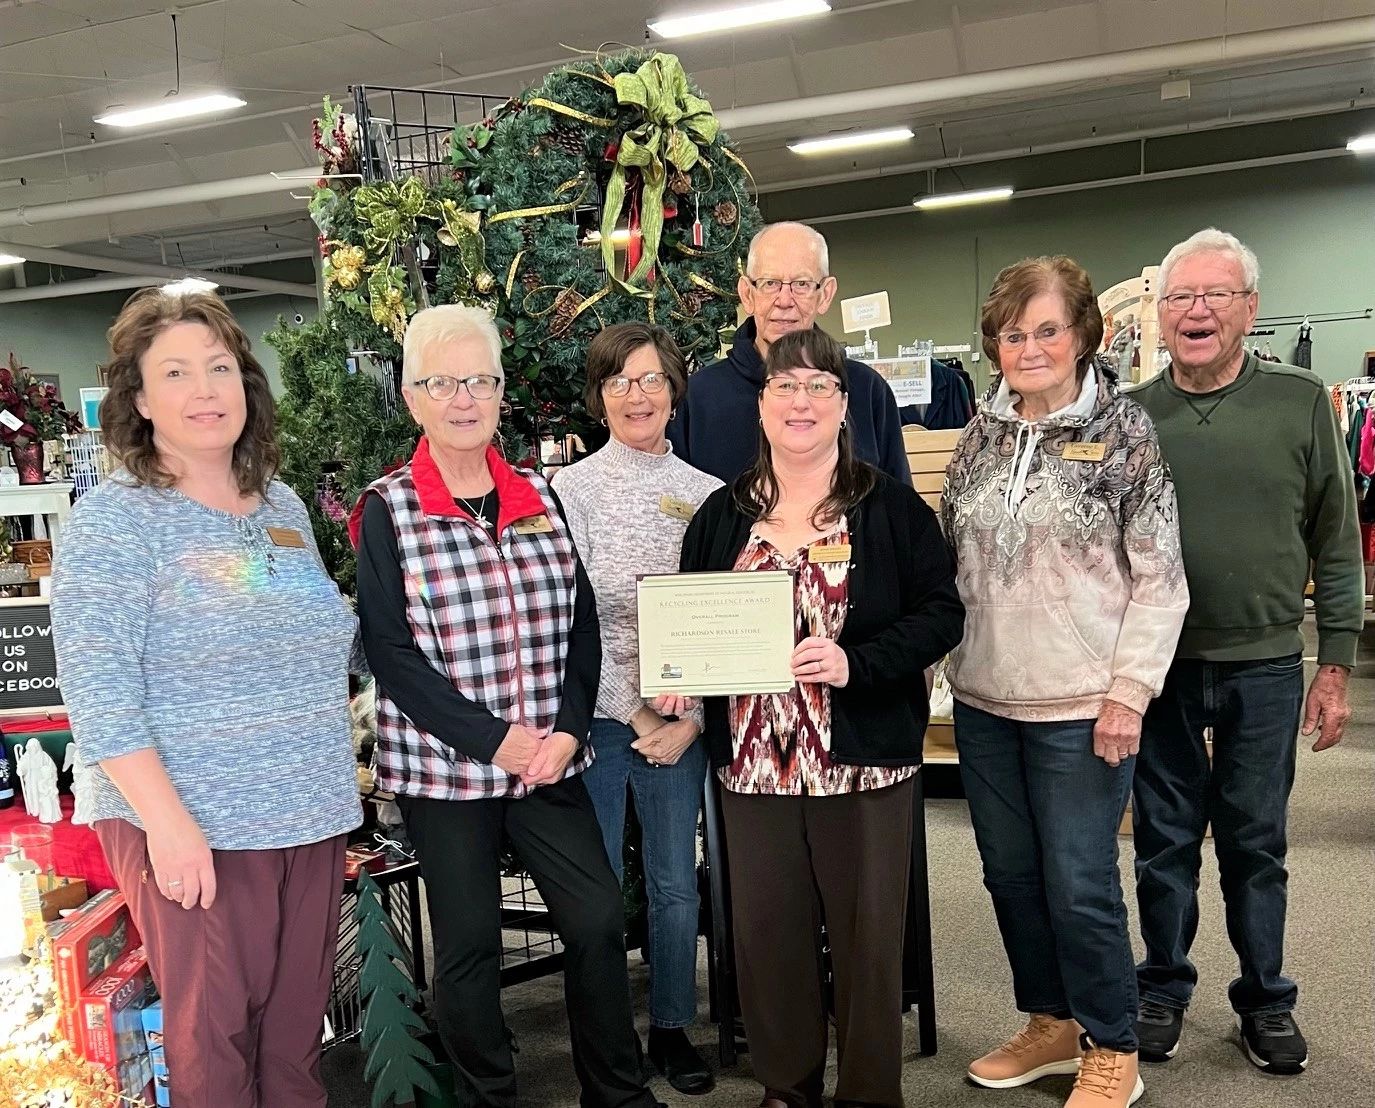 Seven members of the Richardson Resale Store pose in their store in front of a holiday wreath display. The team member in the center holds the business's 2023 Wisconsin Recycling Excellence Award certificate from the DNR.